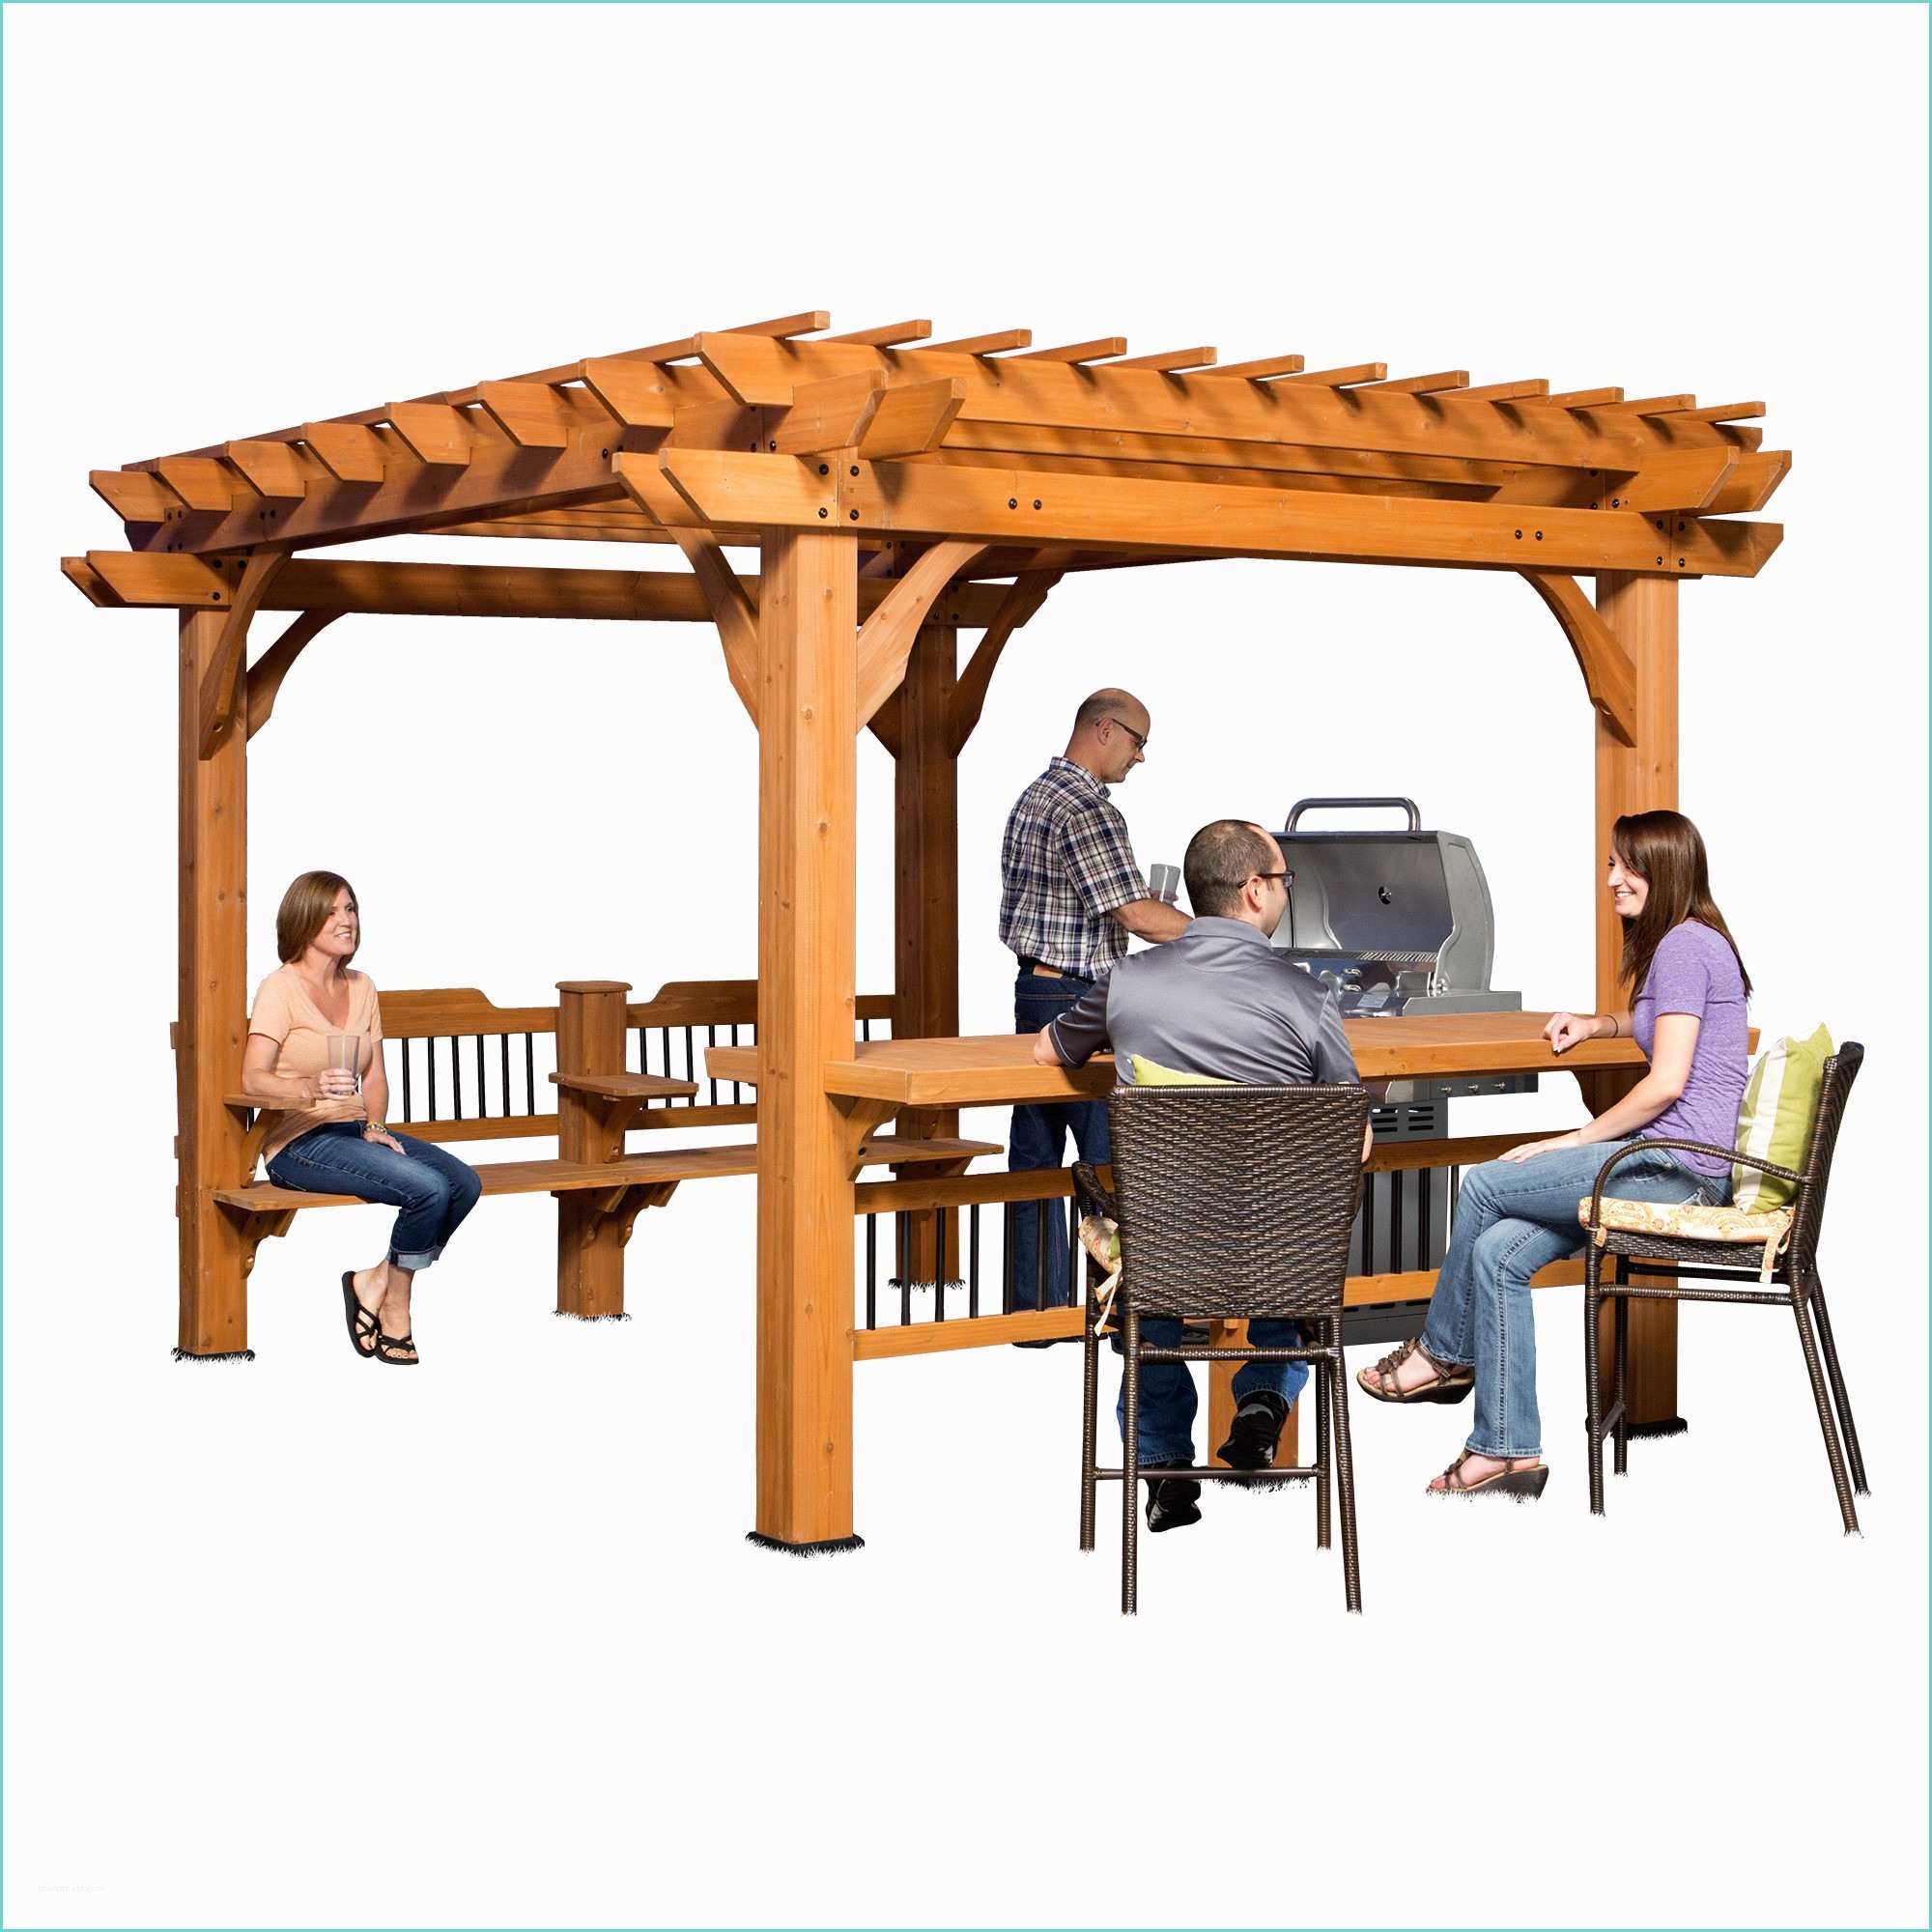 How to Build A Backyard Discovery Pergola Oasis 12 Ft W X 10 Ft D Pergola